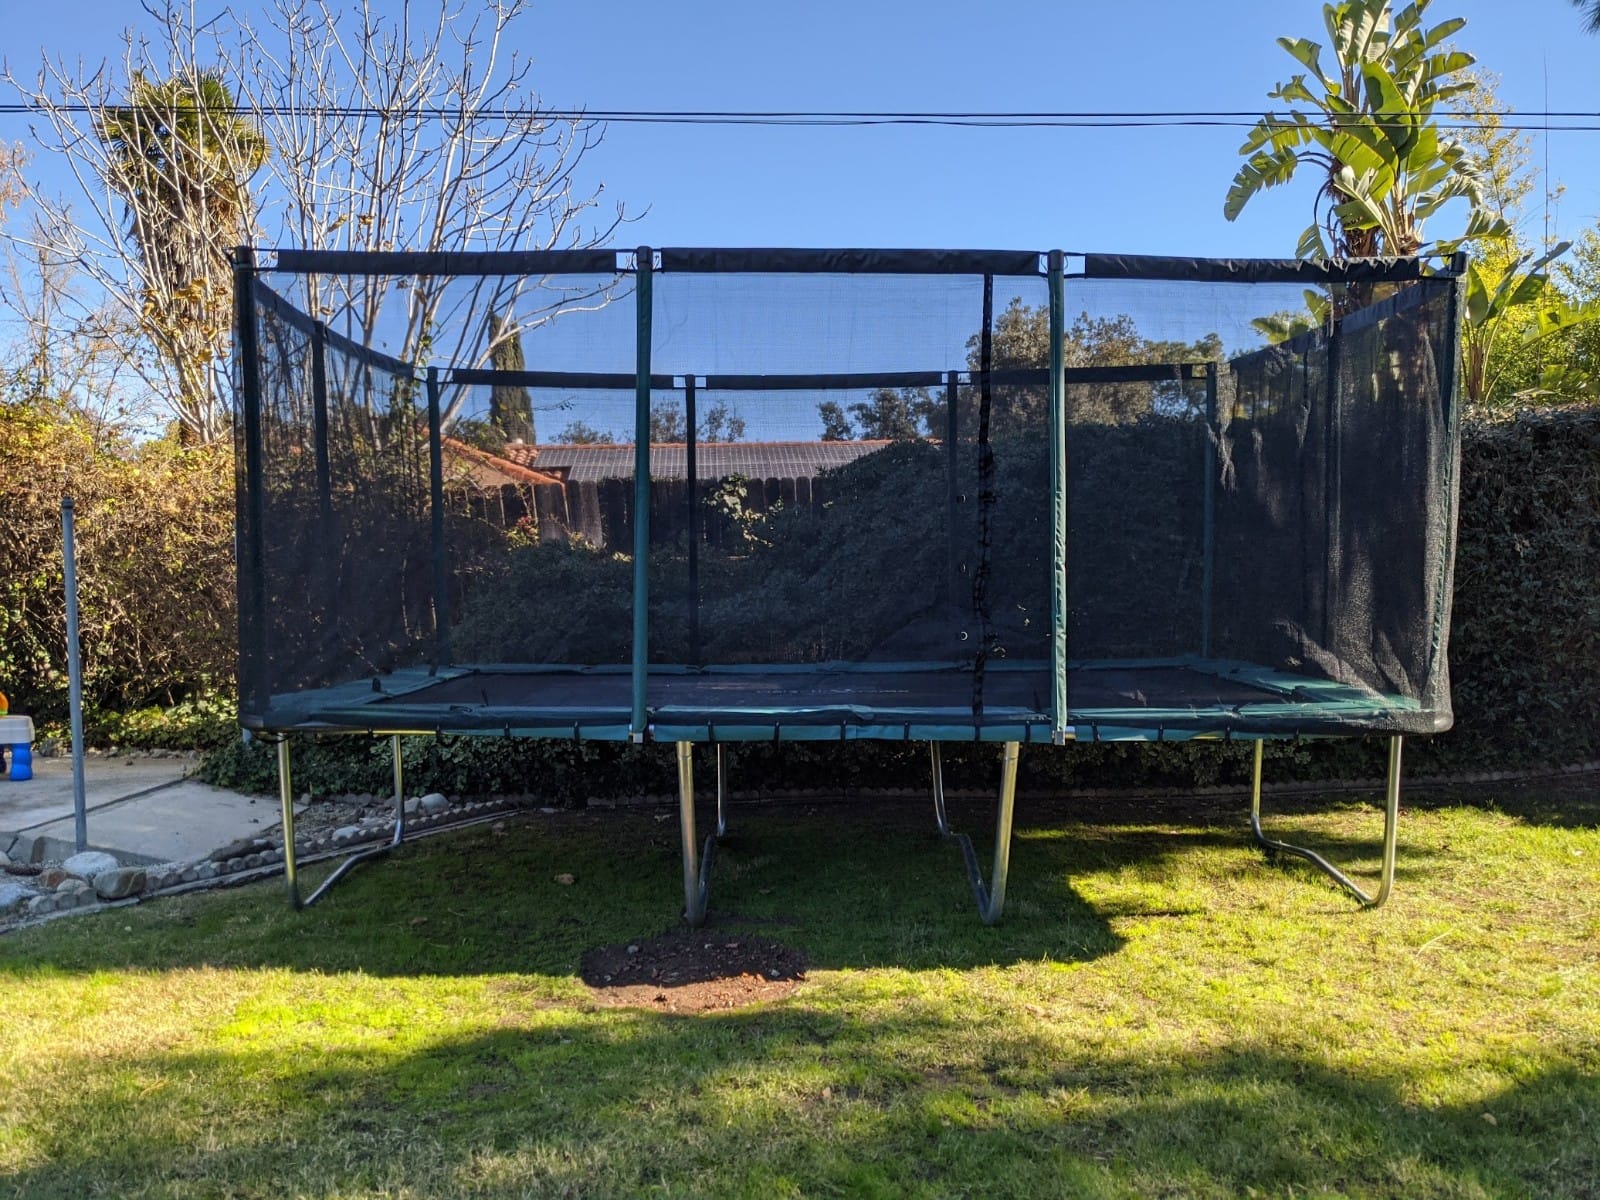 Galactic Xtreme 10x17 FT Outdoor Rectangle Trampoline with Net Enclosure 750Lbs Heavy Weight Jumping Capacity - Outdoor Gymnastics Trampolines for Adults and Kids - image 3 of 7